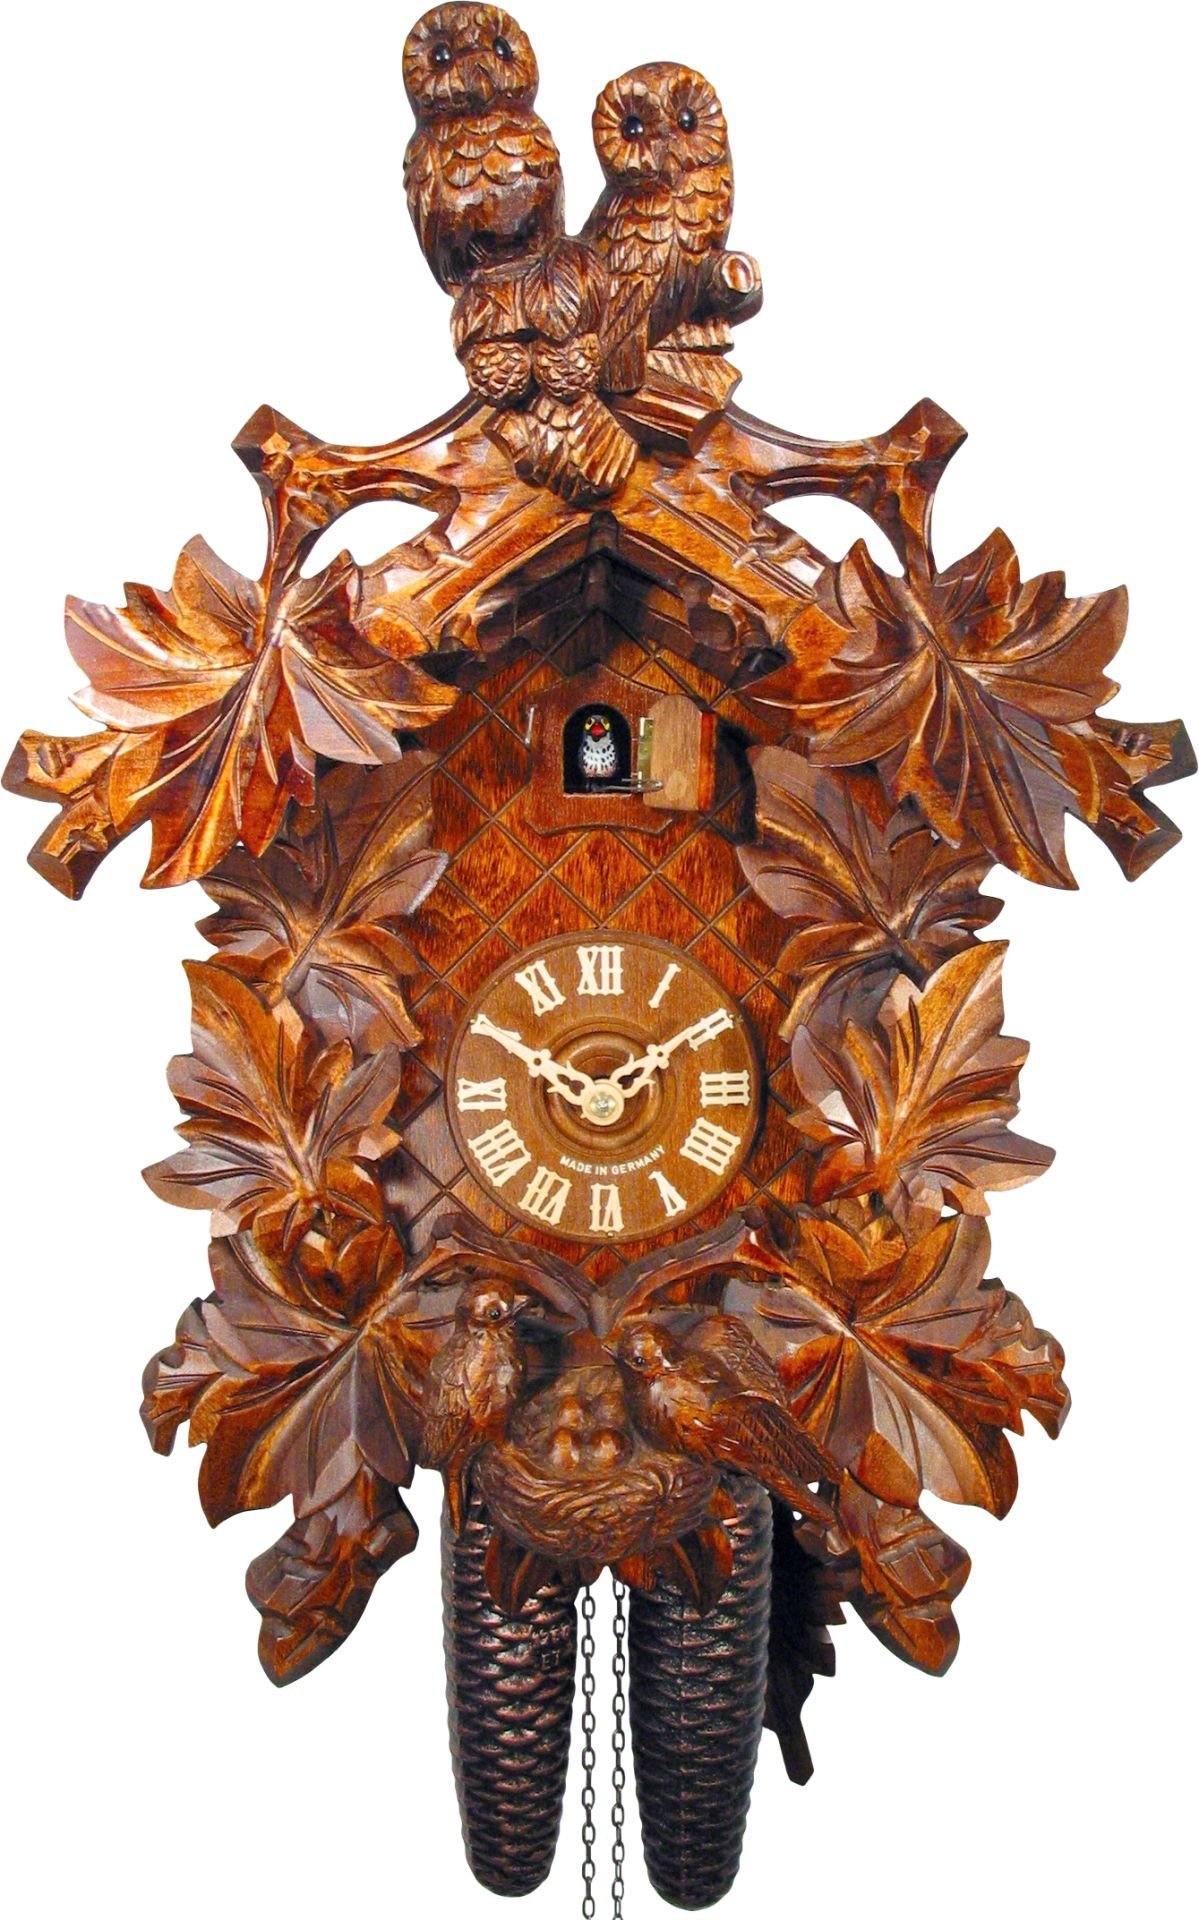 Cuckoo Clock Carved Style 8 Day Movement 42cm by August Schwer